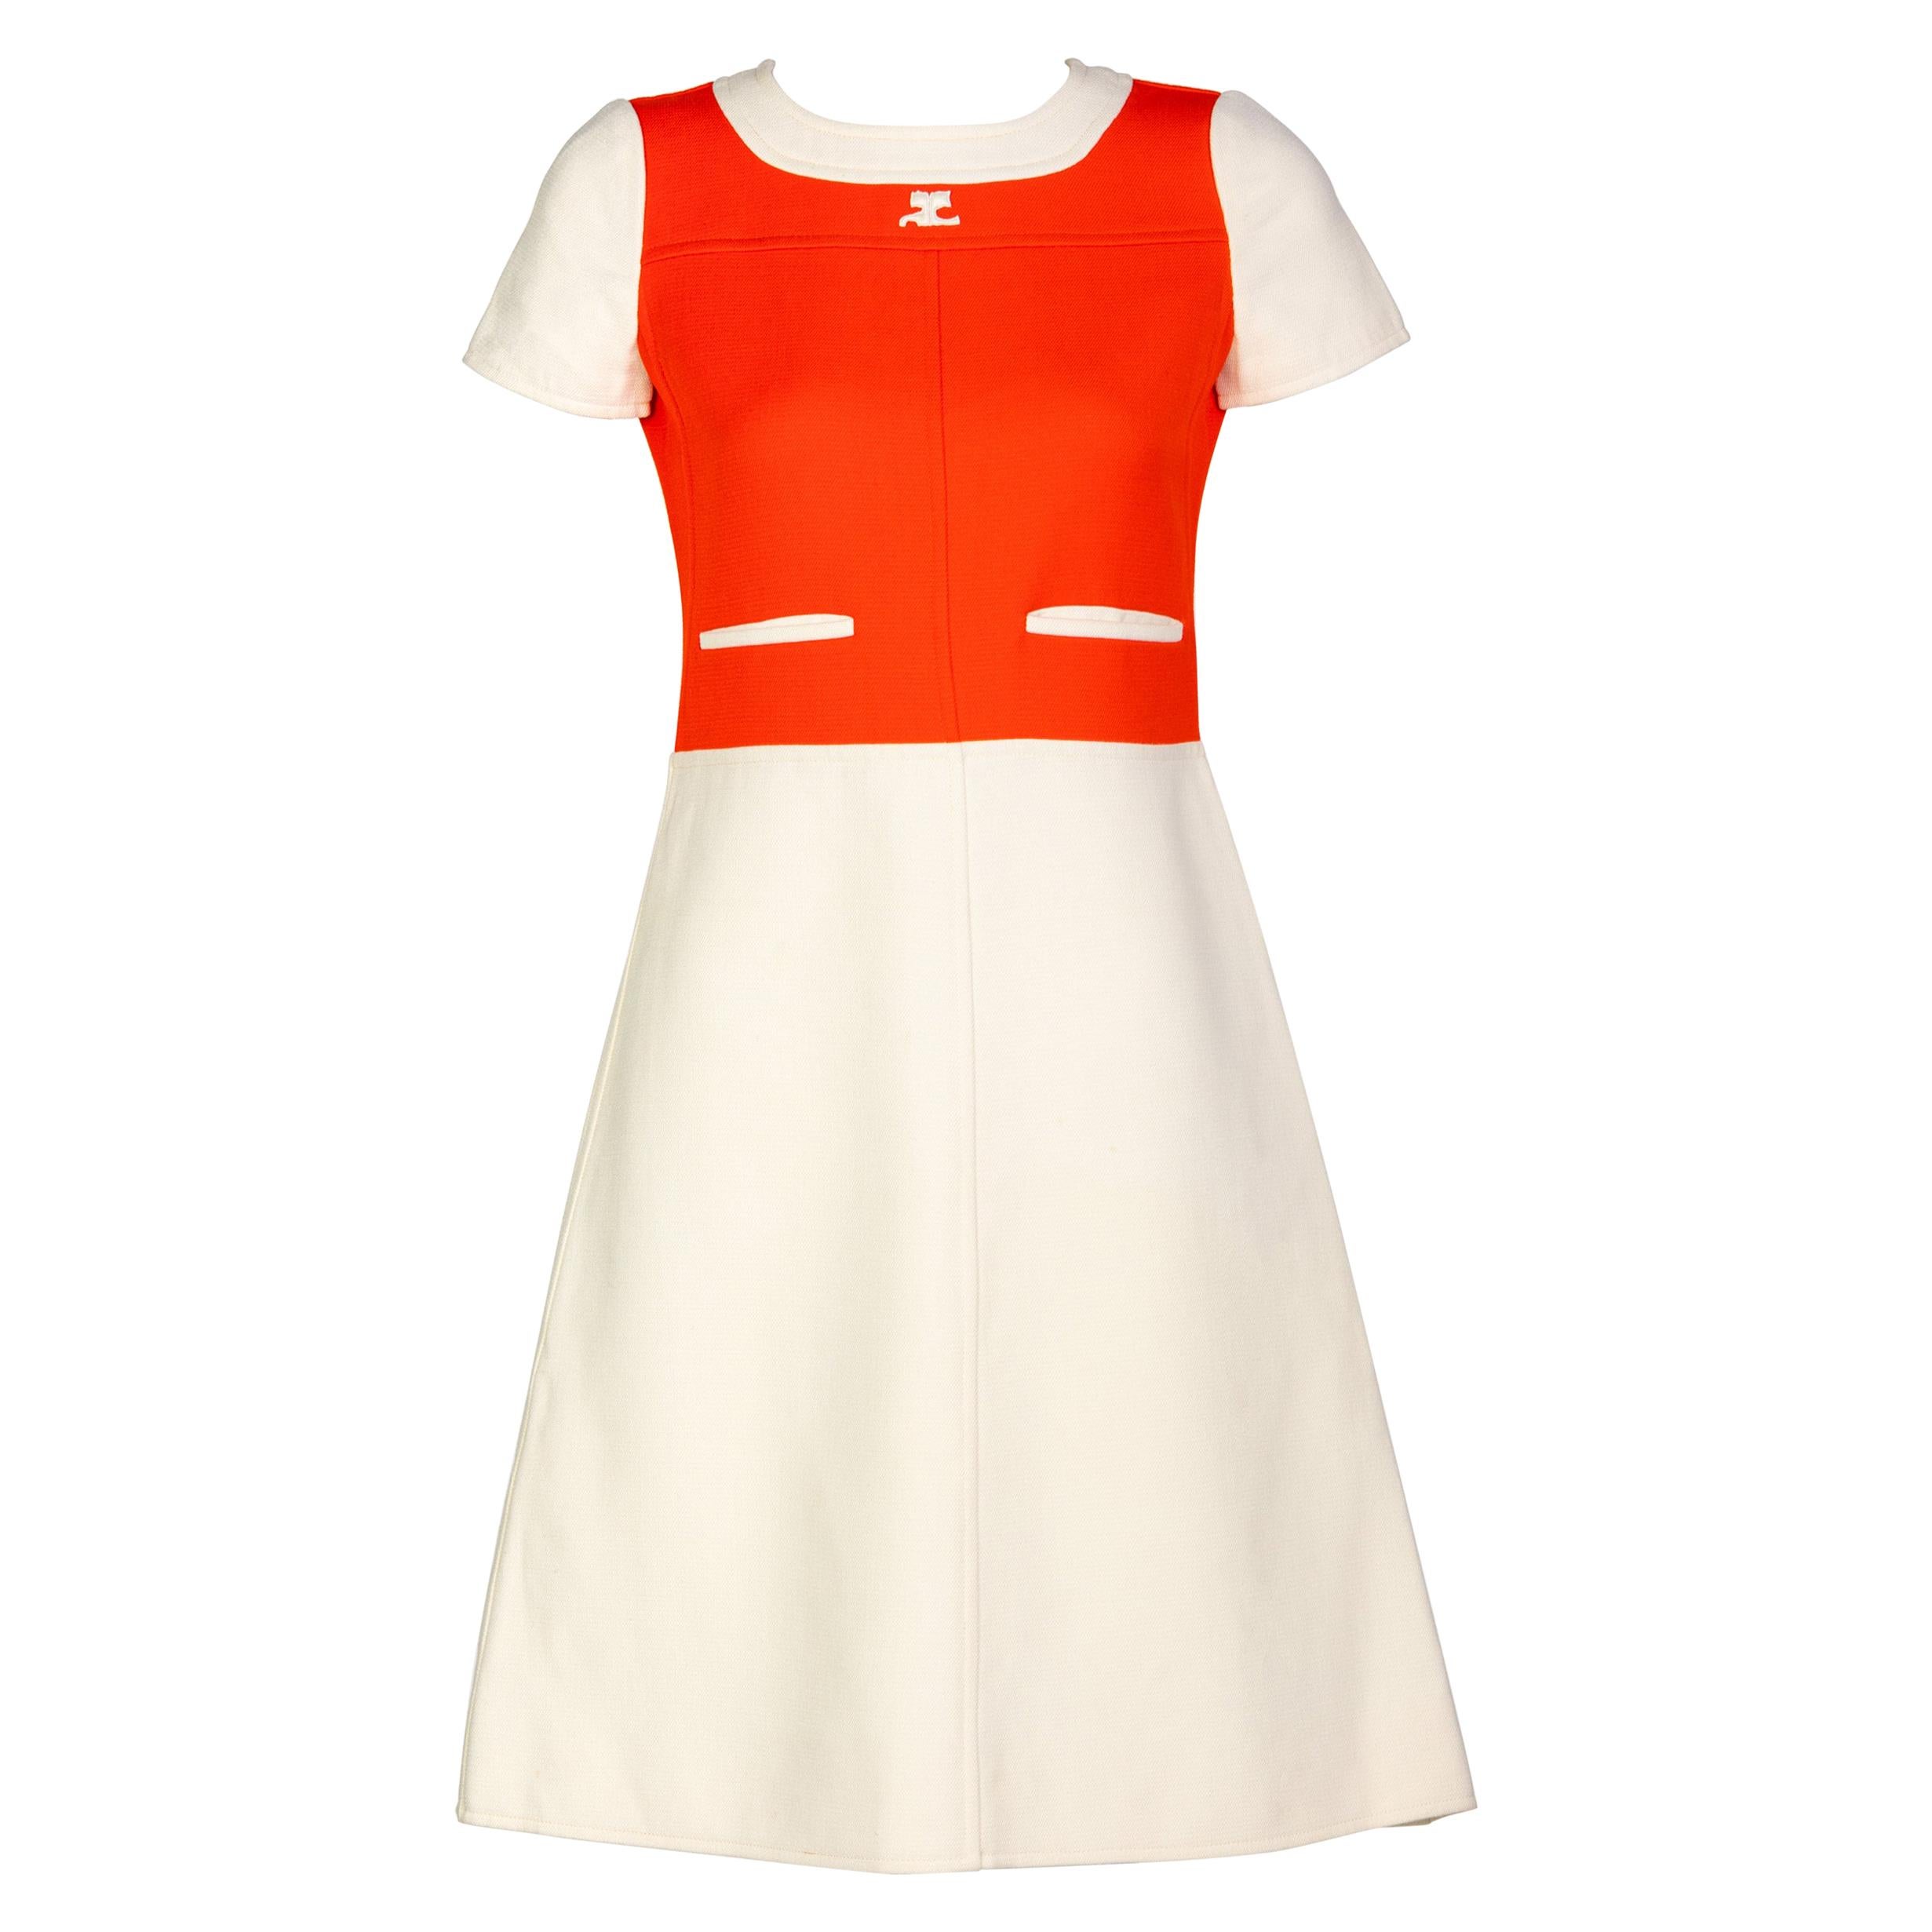 Courreges Numbered Couture Creme Orange Mod a Line Dress, 1960s For Sale